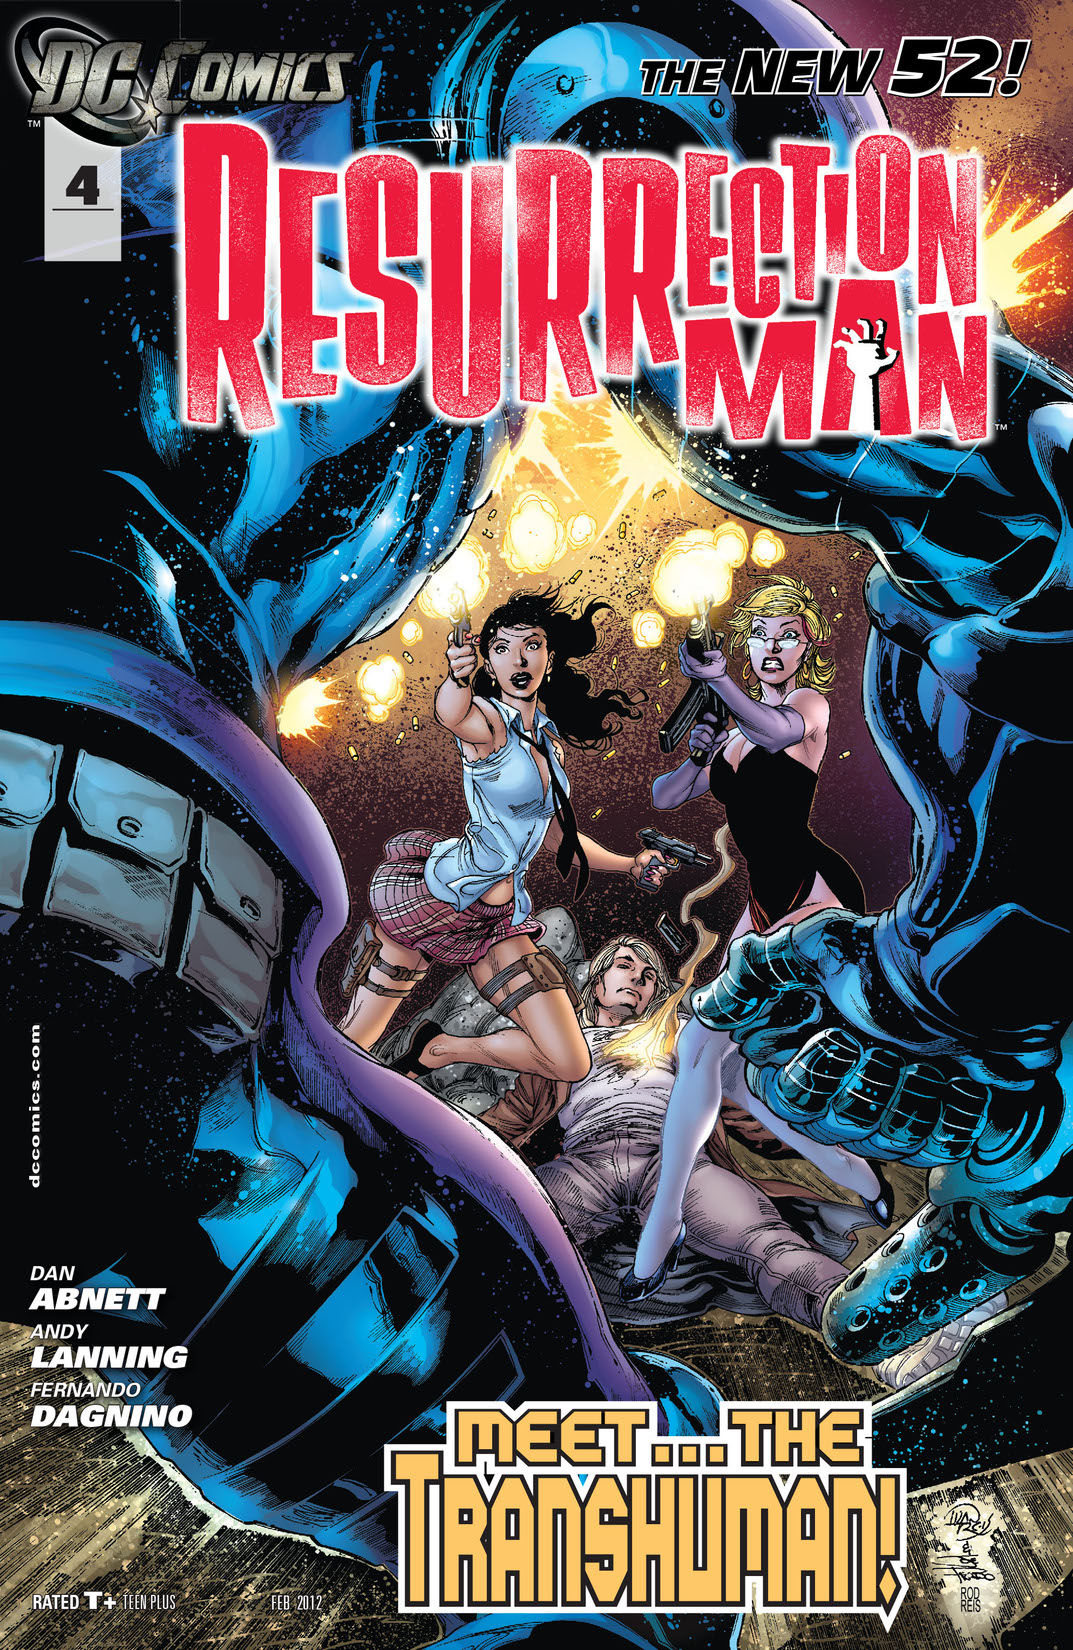 Resurrection Man (2011-) #4 preview images